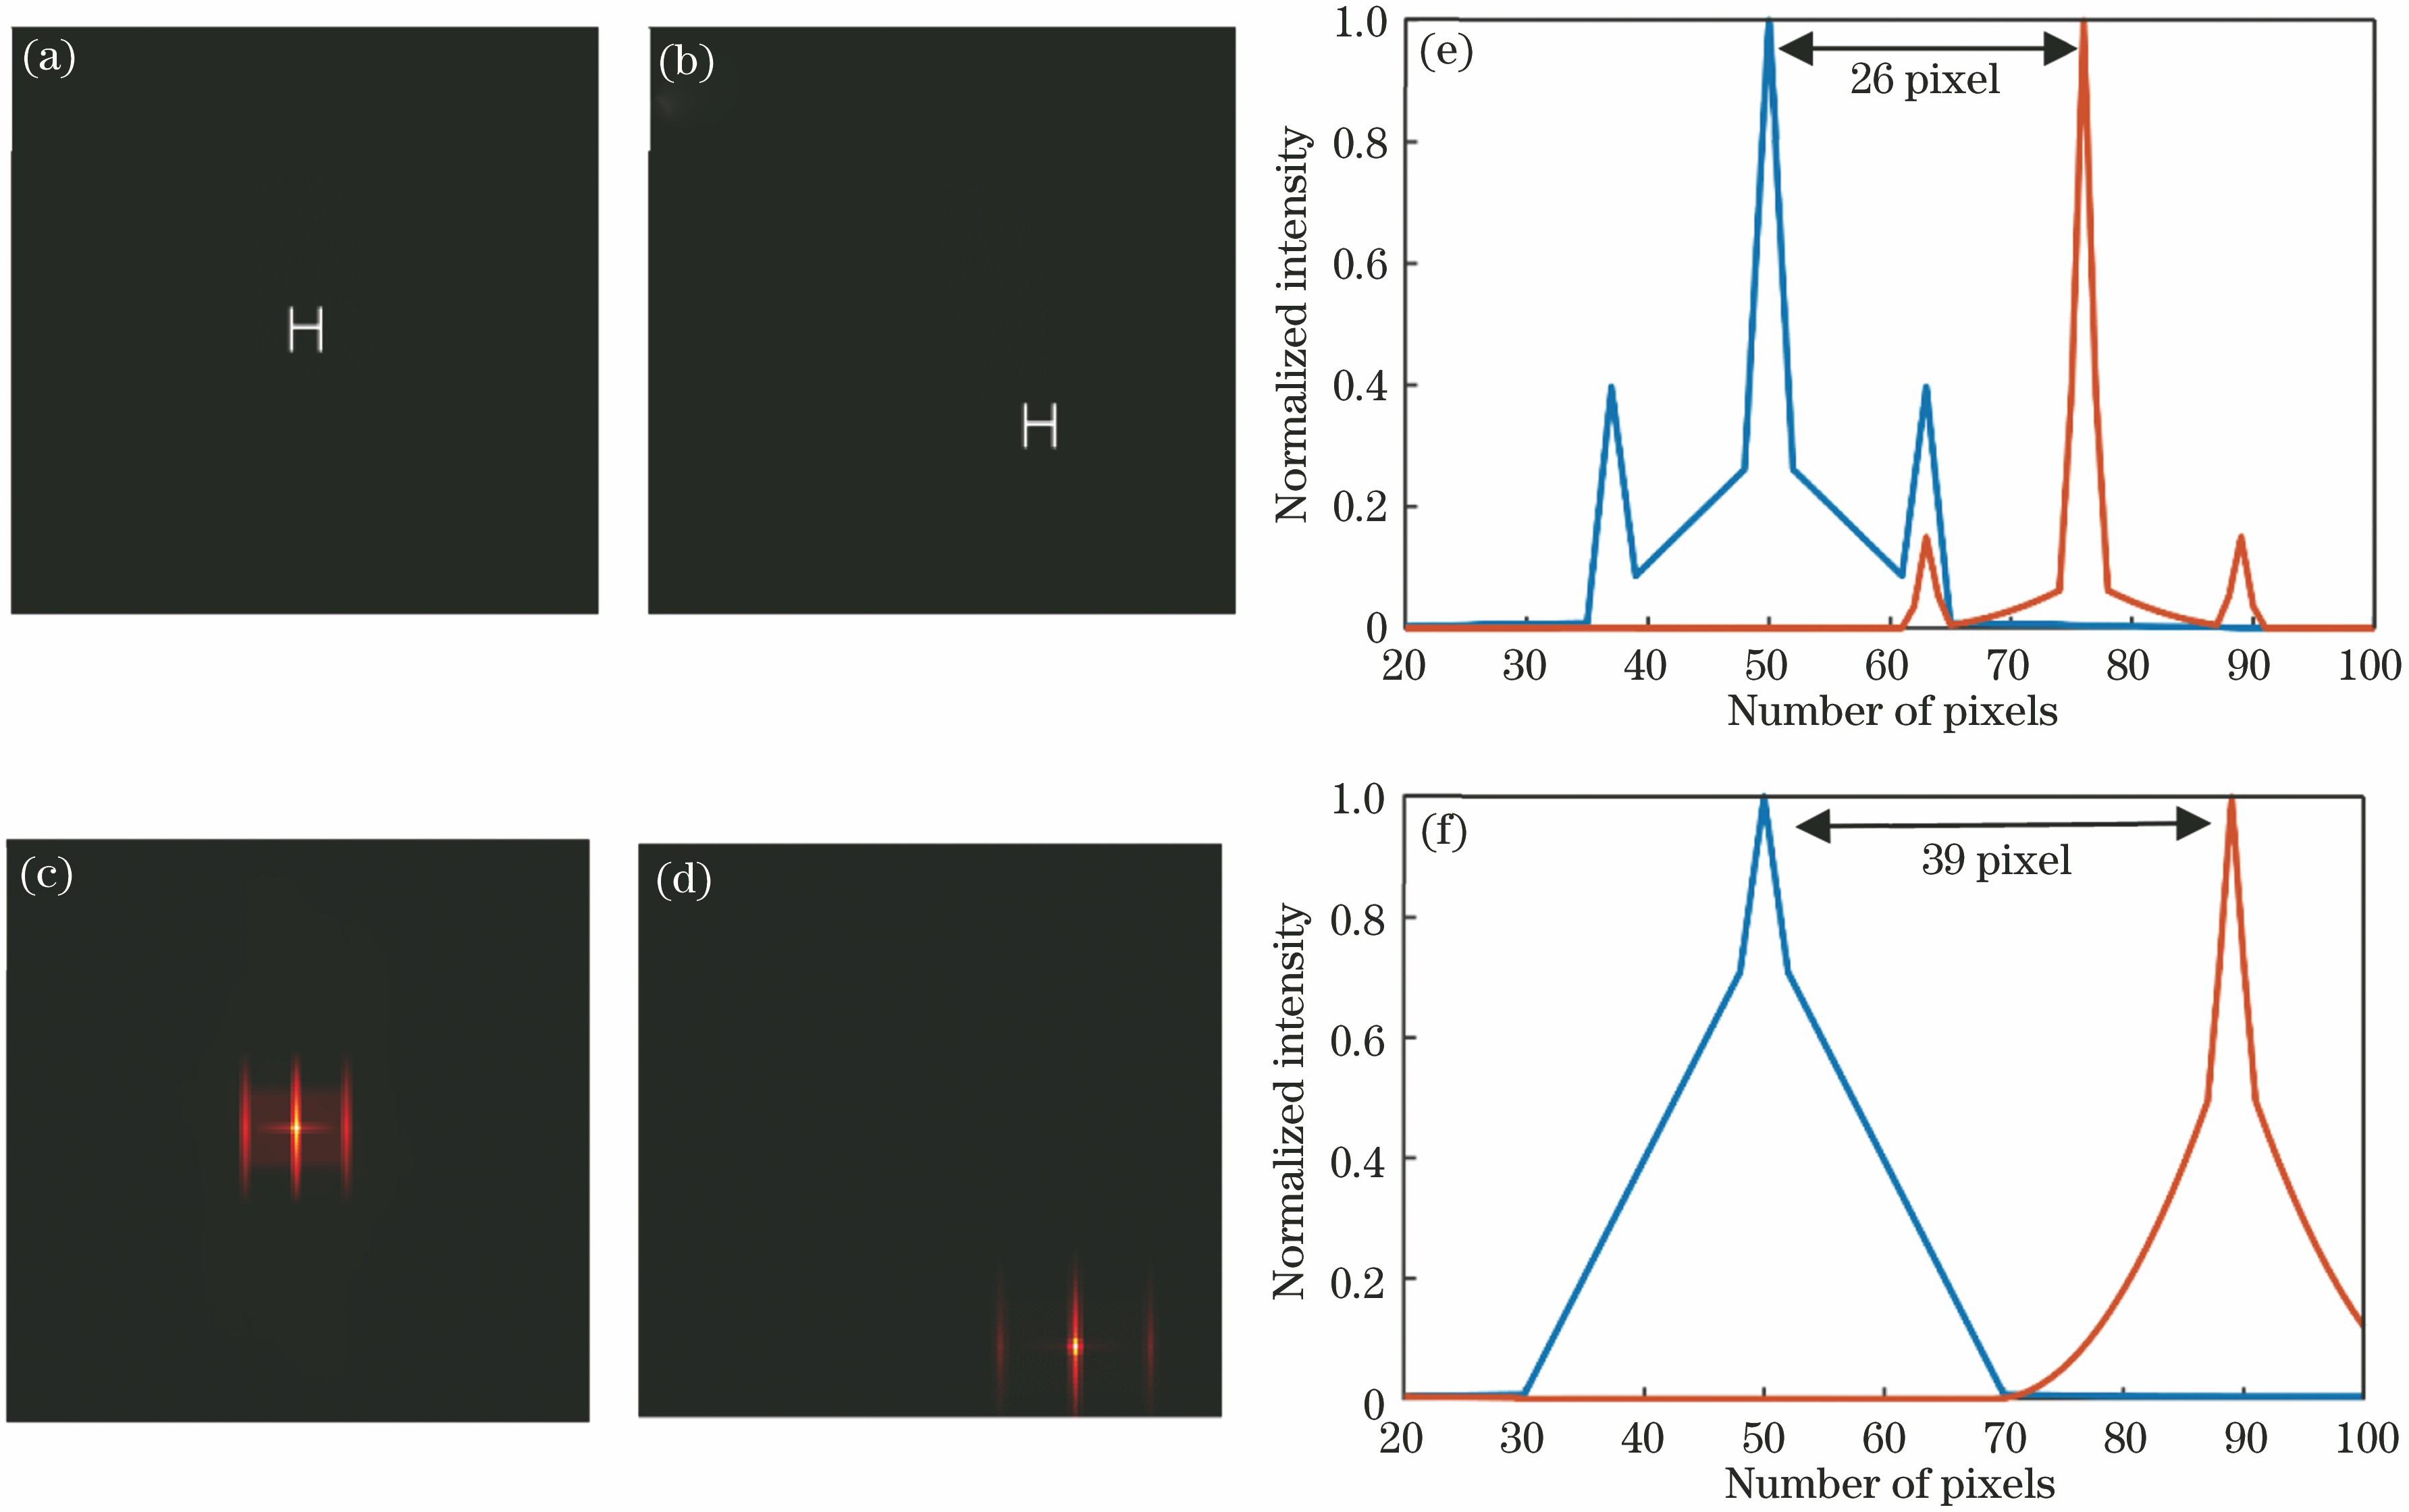 Simulation results of object offset. (a) Reference image; (b) offset image; (c) reference image after autocorrelation; (d) cross-correlation between offset image and reference image; (e) horizontal offset between offset image and reference image; (f) vertical offset between offset image and reference image